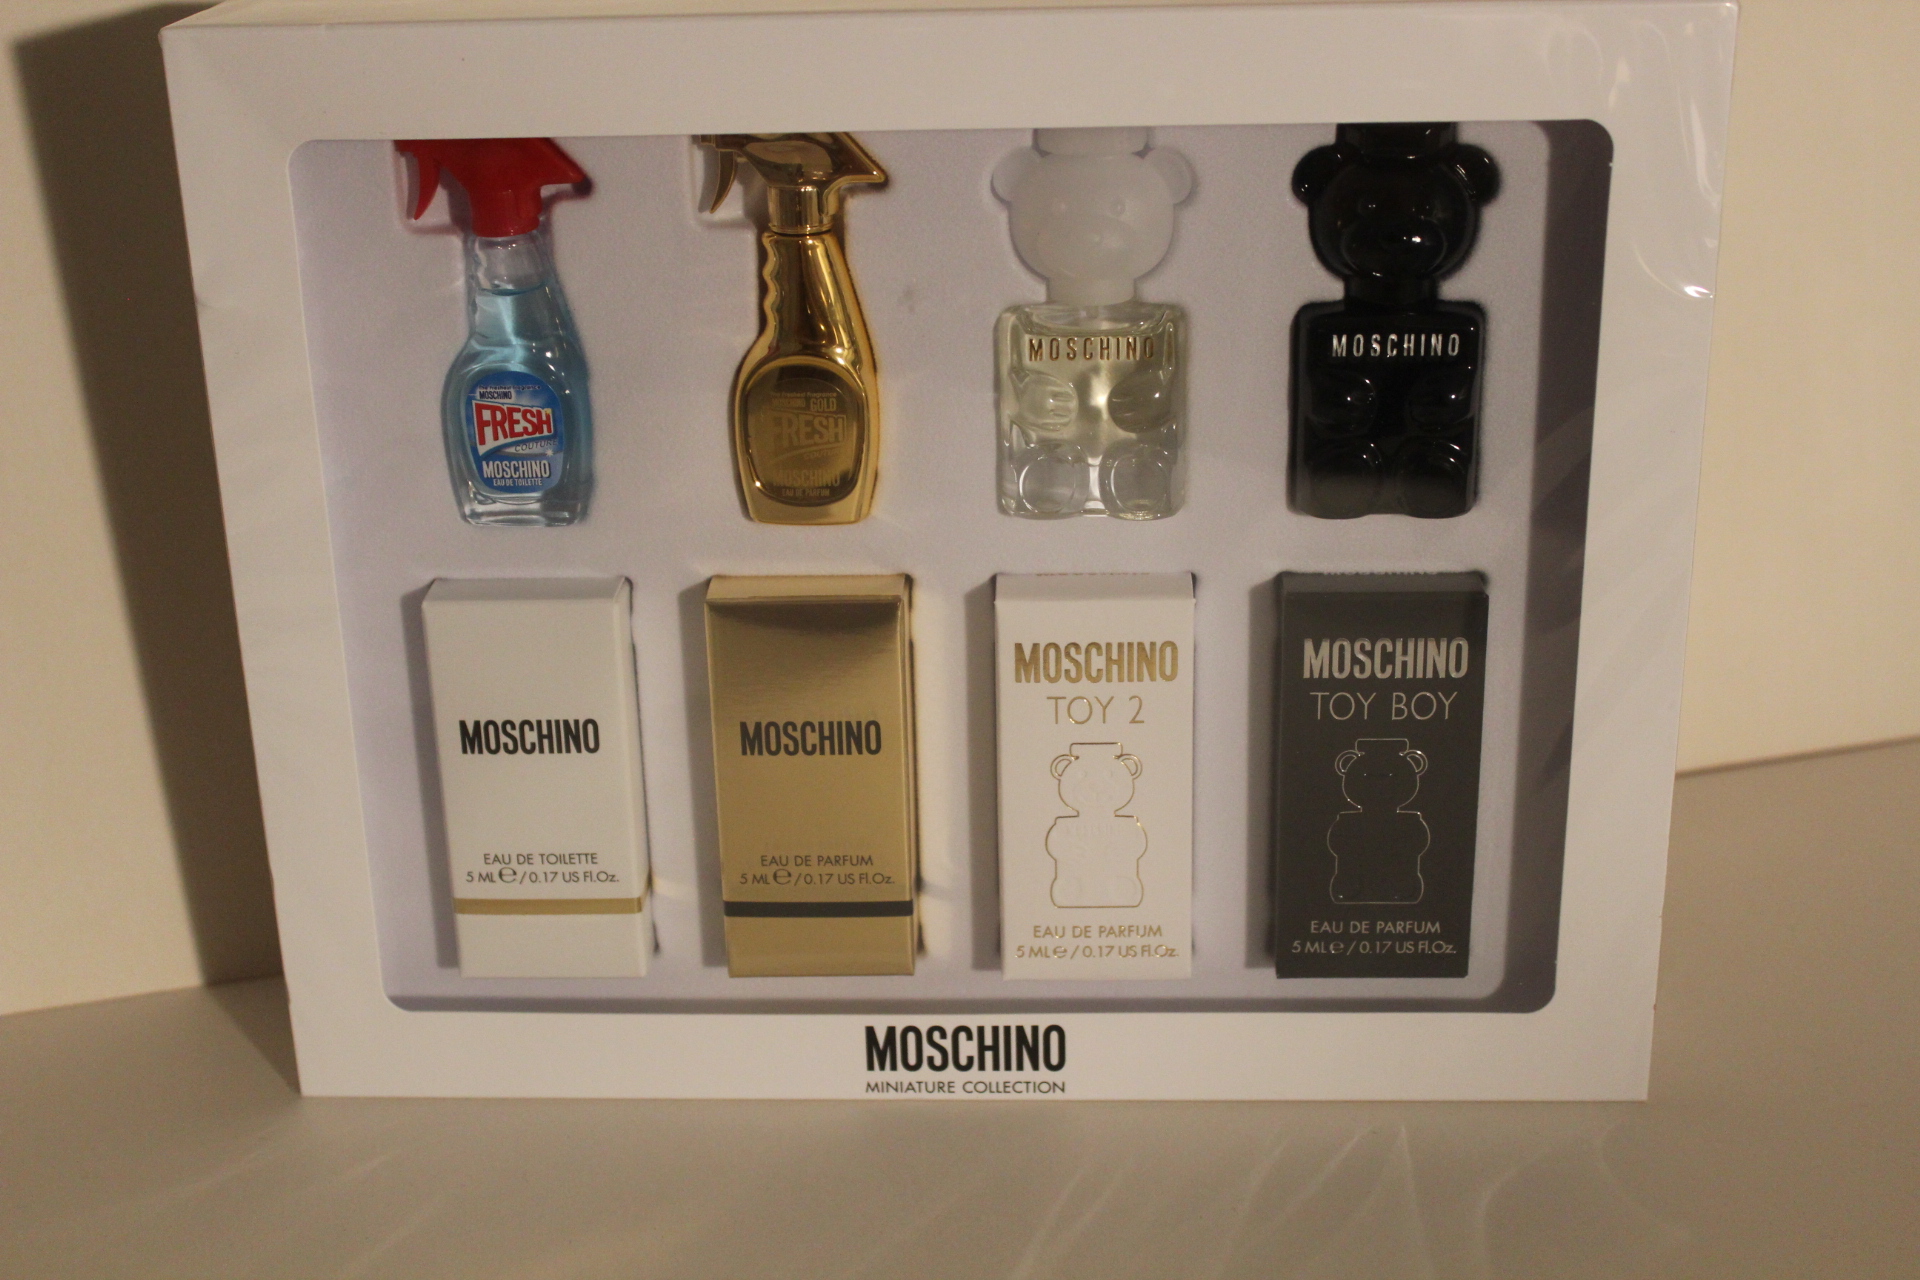 Moschino Miniature Collection / Italy 